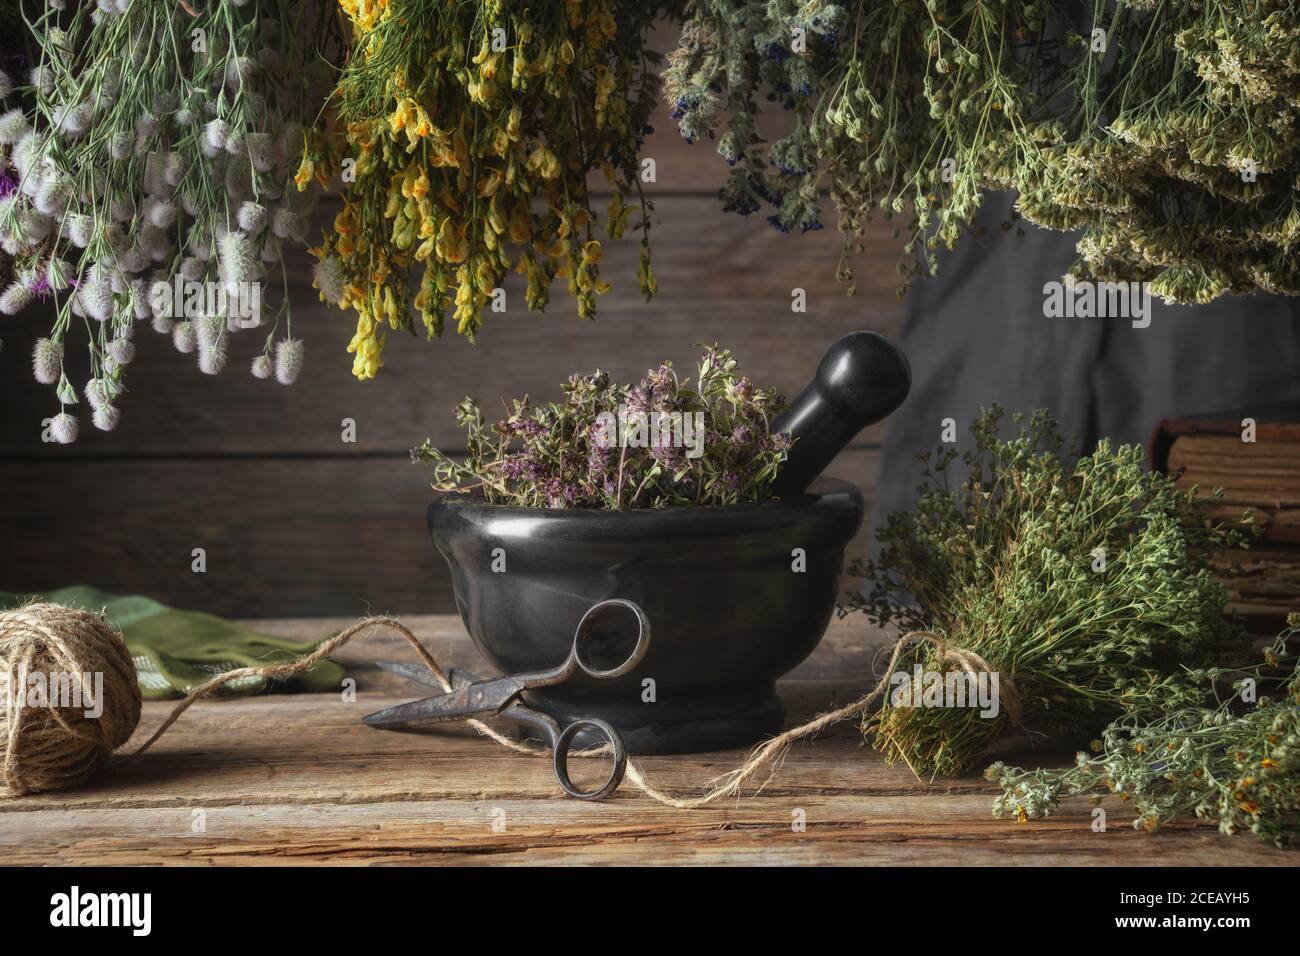 Hanging bunches of medicinal herbs, black stone mortar with dried plants. Alternative medicine. Stock Photo